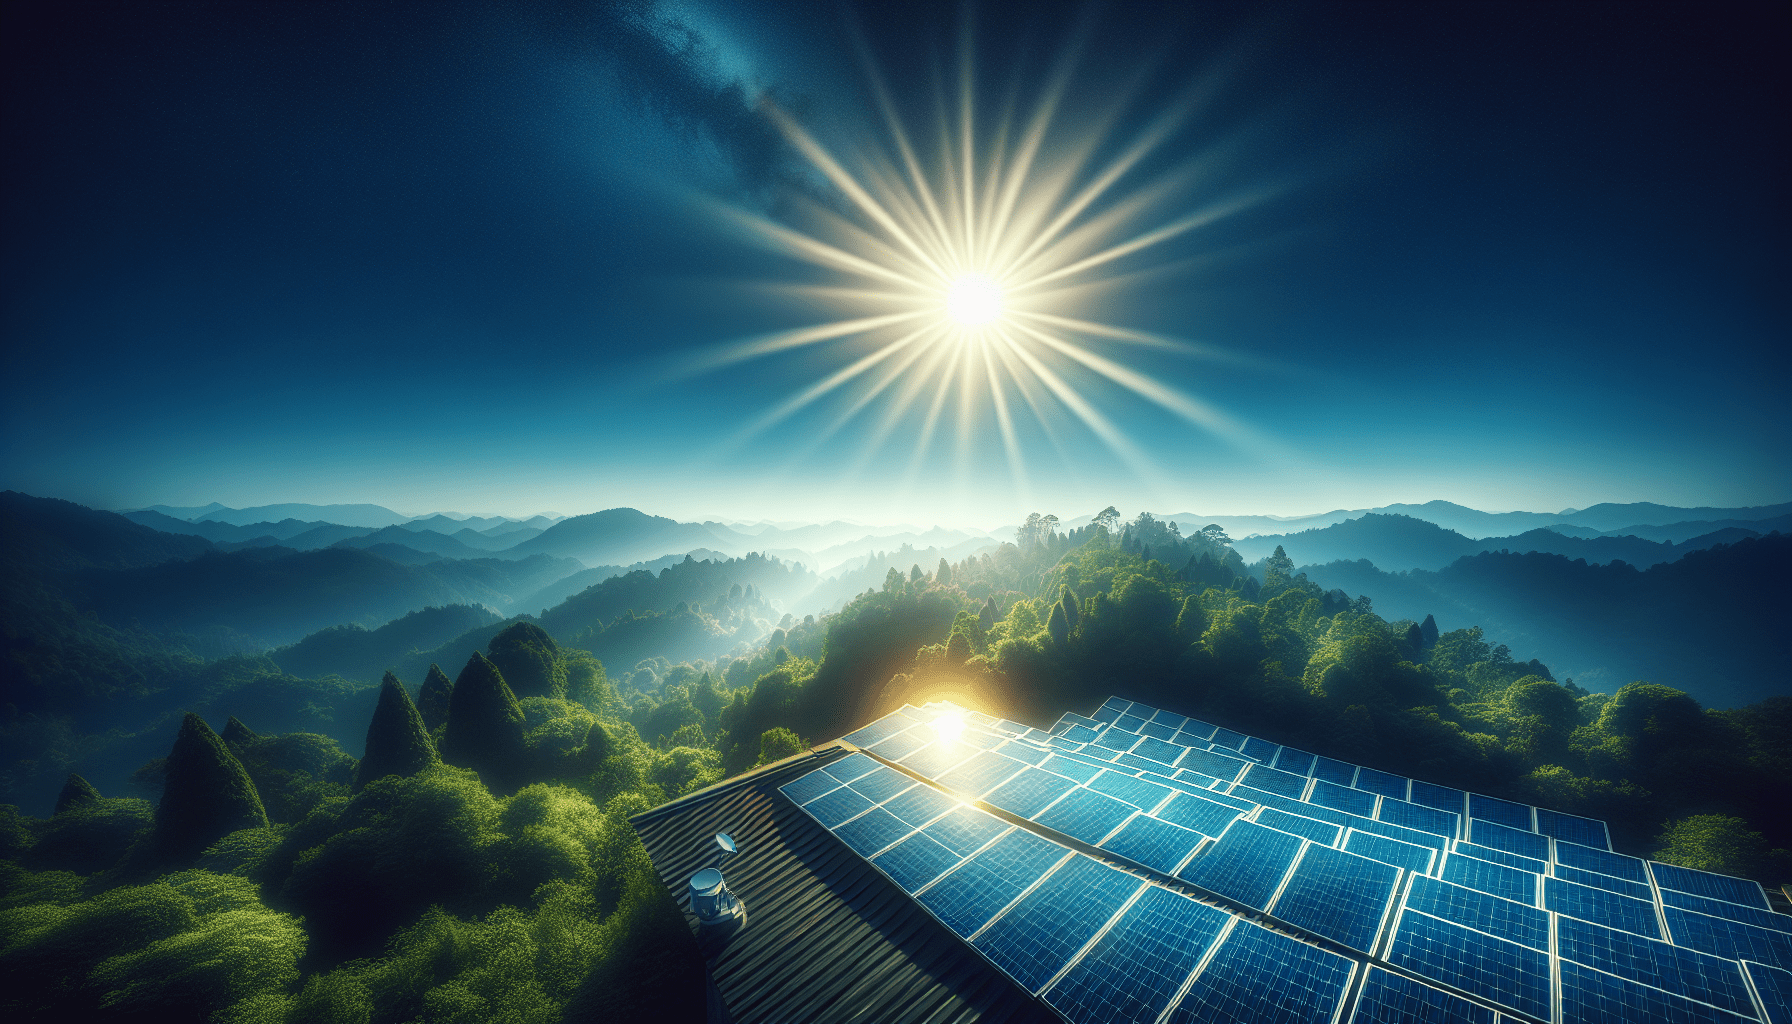 What Are The Benefits Of Solar Power?